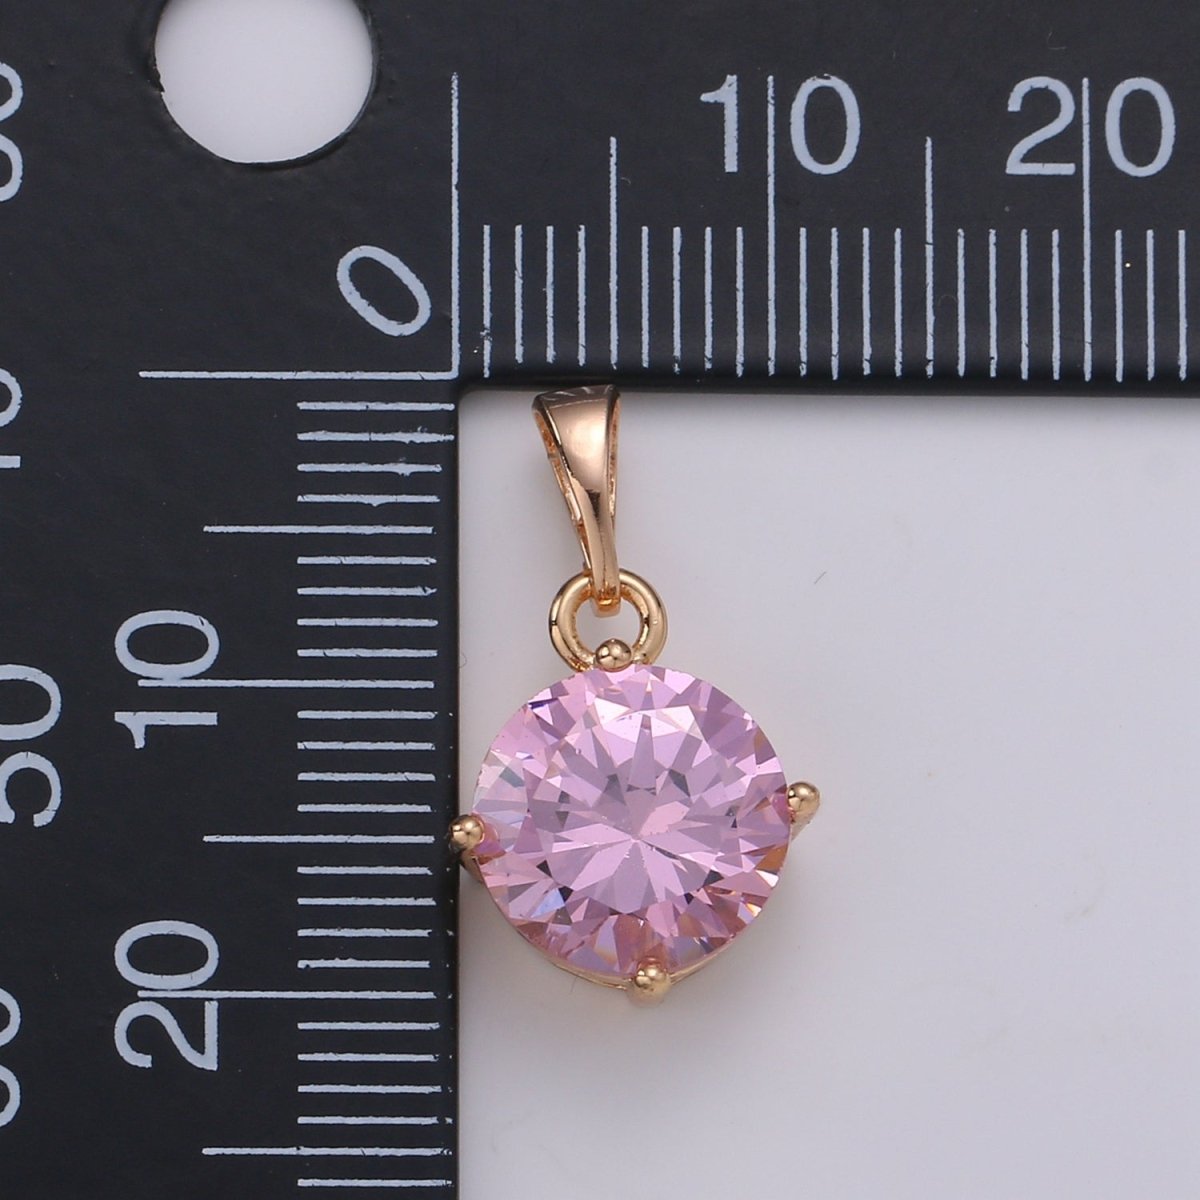 DEL- Gemstone Round Charm, Pink Solitaire Cz Pendant, 20x10mm, 18k Gold Filled Pendant Dangle Jewelry, Necklace Earring Valentine Gift J-098 - DLUXCA